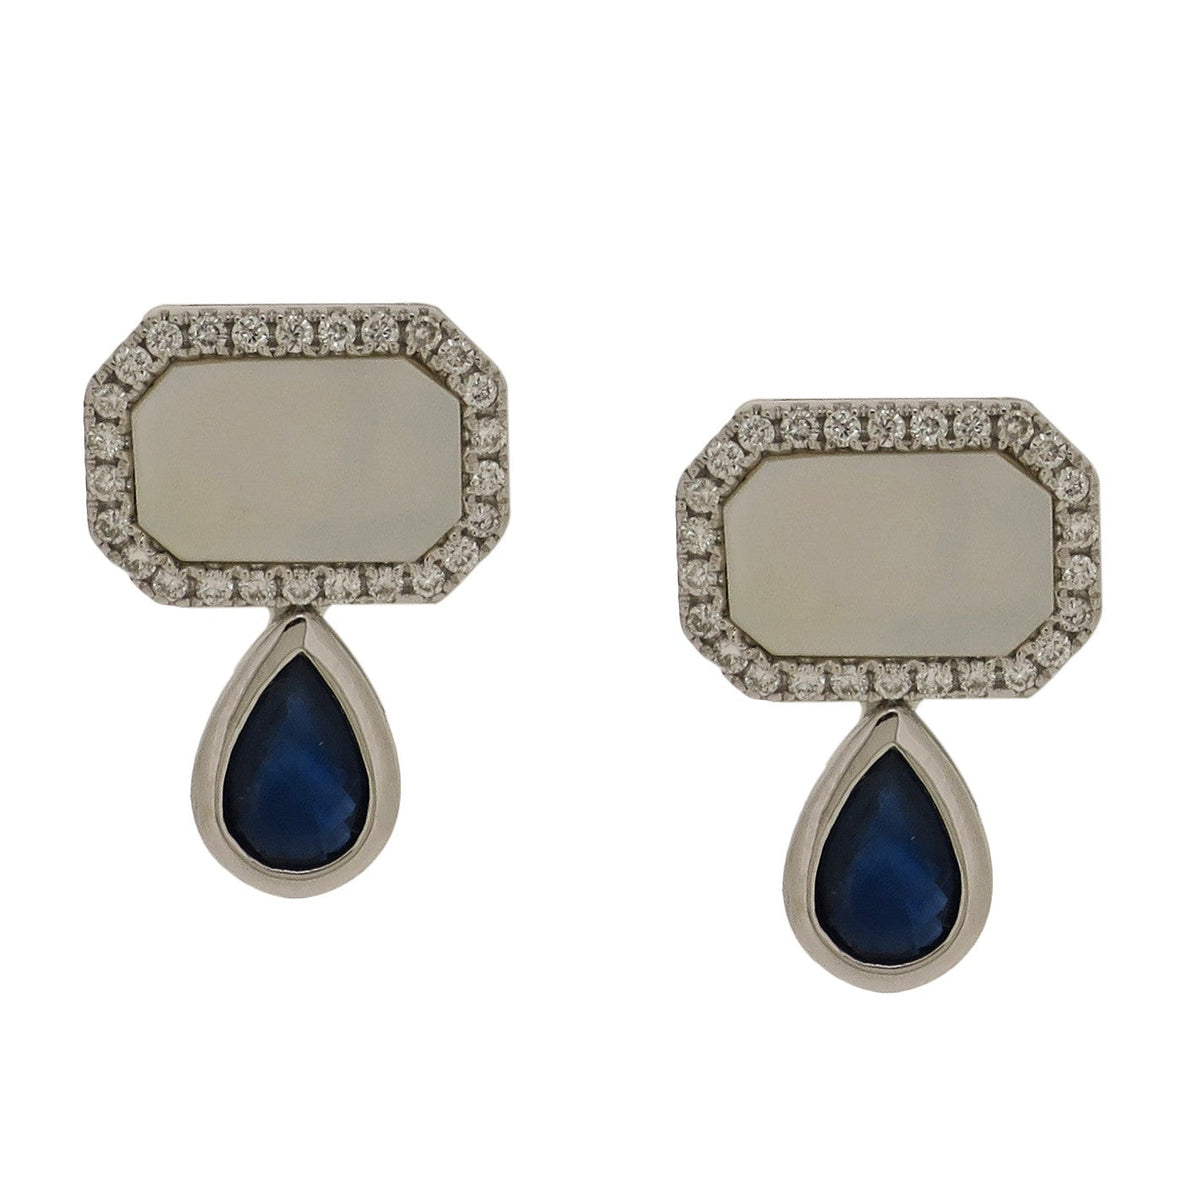 Mother of Pearl with Diamond & Blue Sapphire Drop Earrings.18K White Gold: 3.483 grams Diamond: 0.191 ct Blue Sapphire: 1.092 ct Mother of Pearl: 1.25 ct